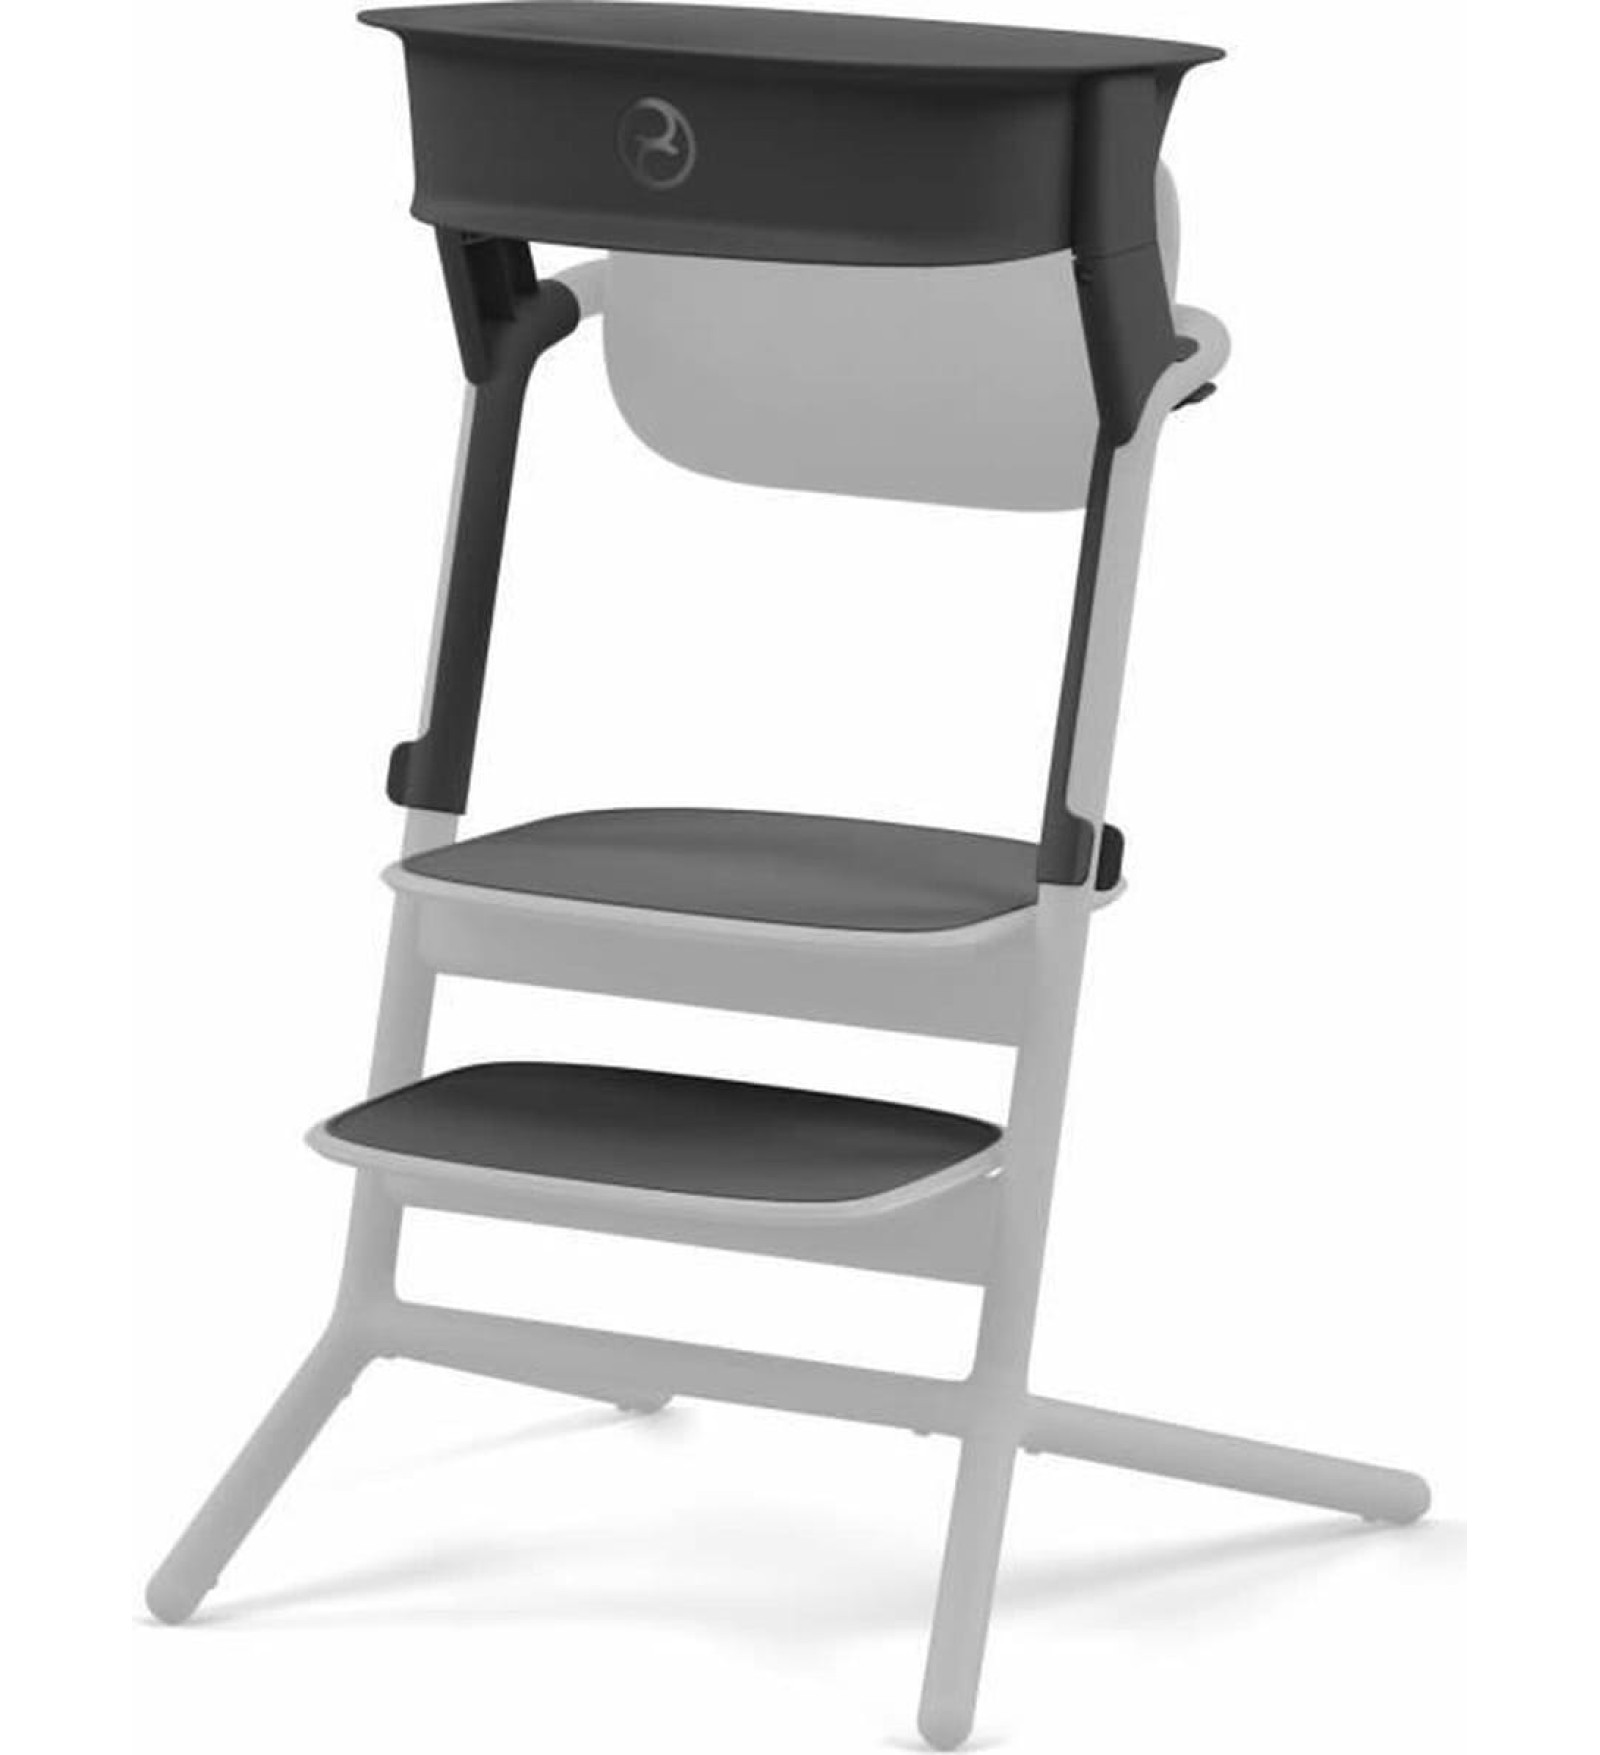 Cybex Child's Chair Cybex Lemo Learning Tower Melns